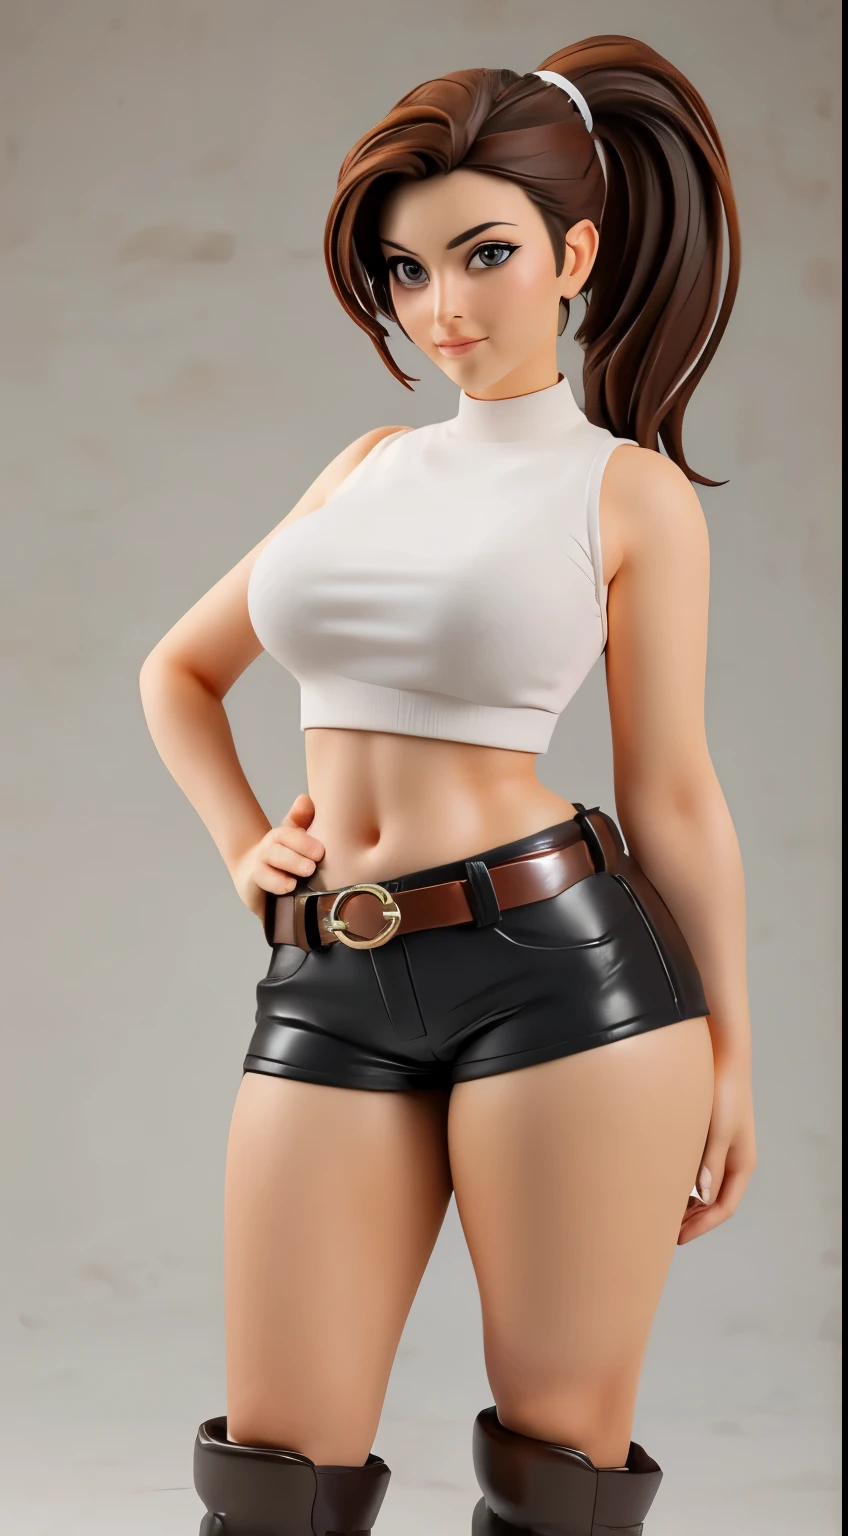 1girl, 30 years old, mature, brown hair, ponytail, (topless:1.1), (hotpants and belt:1.4), boots, as pvc figure, looking at viewer, perfect hands, medium sagging breast, navel, belly button, (Thick body:1.3), ultra realistic digital art, a 3D render, photorealism, clean scene, white background, shinny floor, white floor, circular stand, high detailed, masterpiece,  